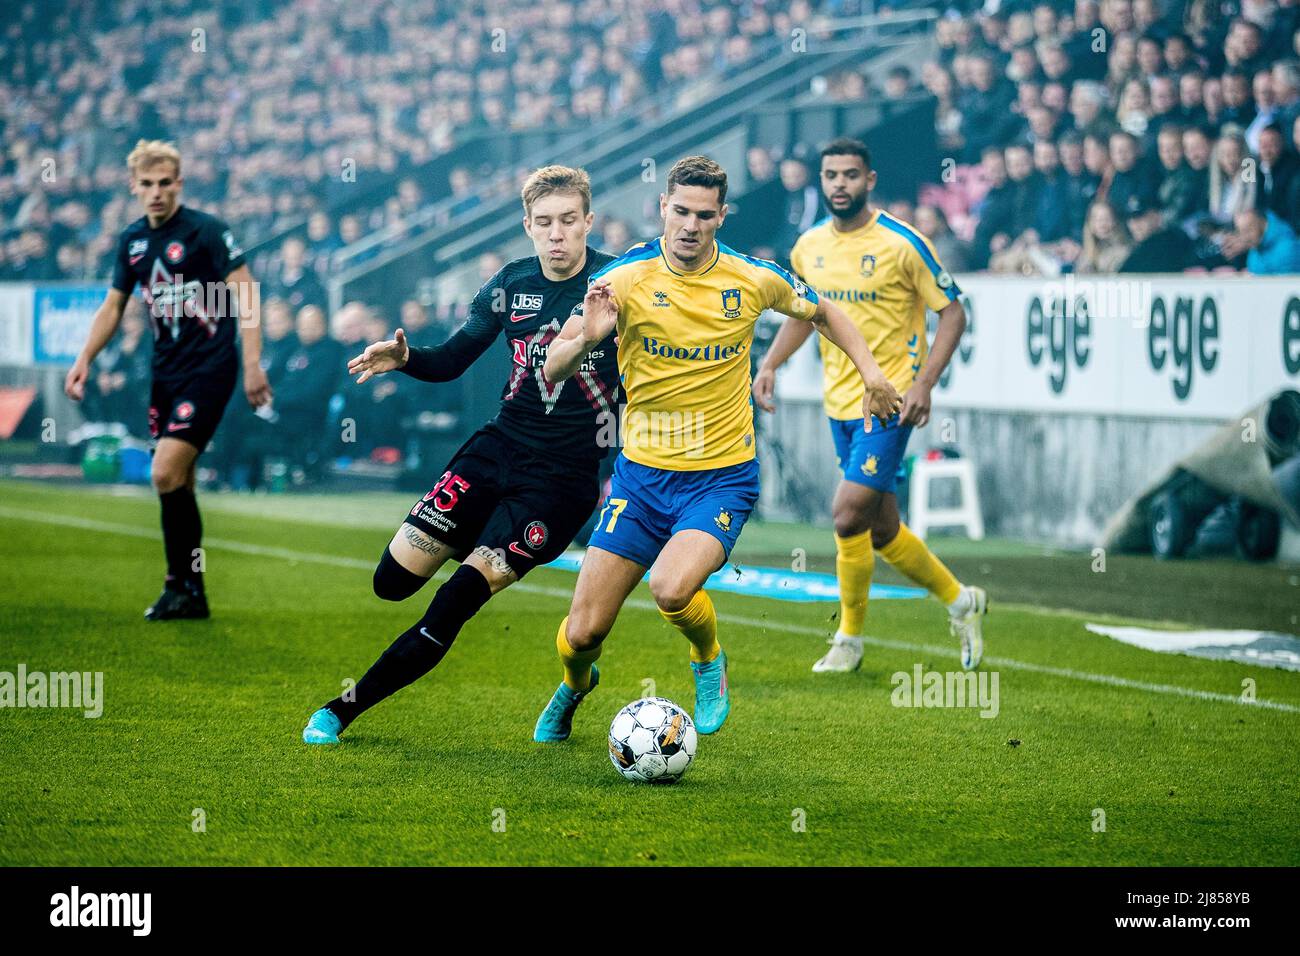 Herning, Denmark. 12th May, 2022. Andreas Bruus (17) of Broendby IF and Charles (35) of FC Midtjylland seen during the 3F Superliga match between FC Midtjylland and Broendby IF at MCH Arena in Herning. (Photo Credit: Gonzales Photo/Alamy Live News Stock Photo